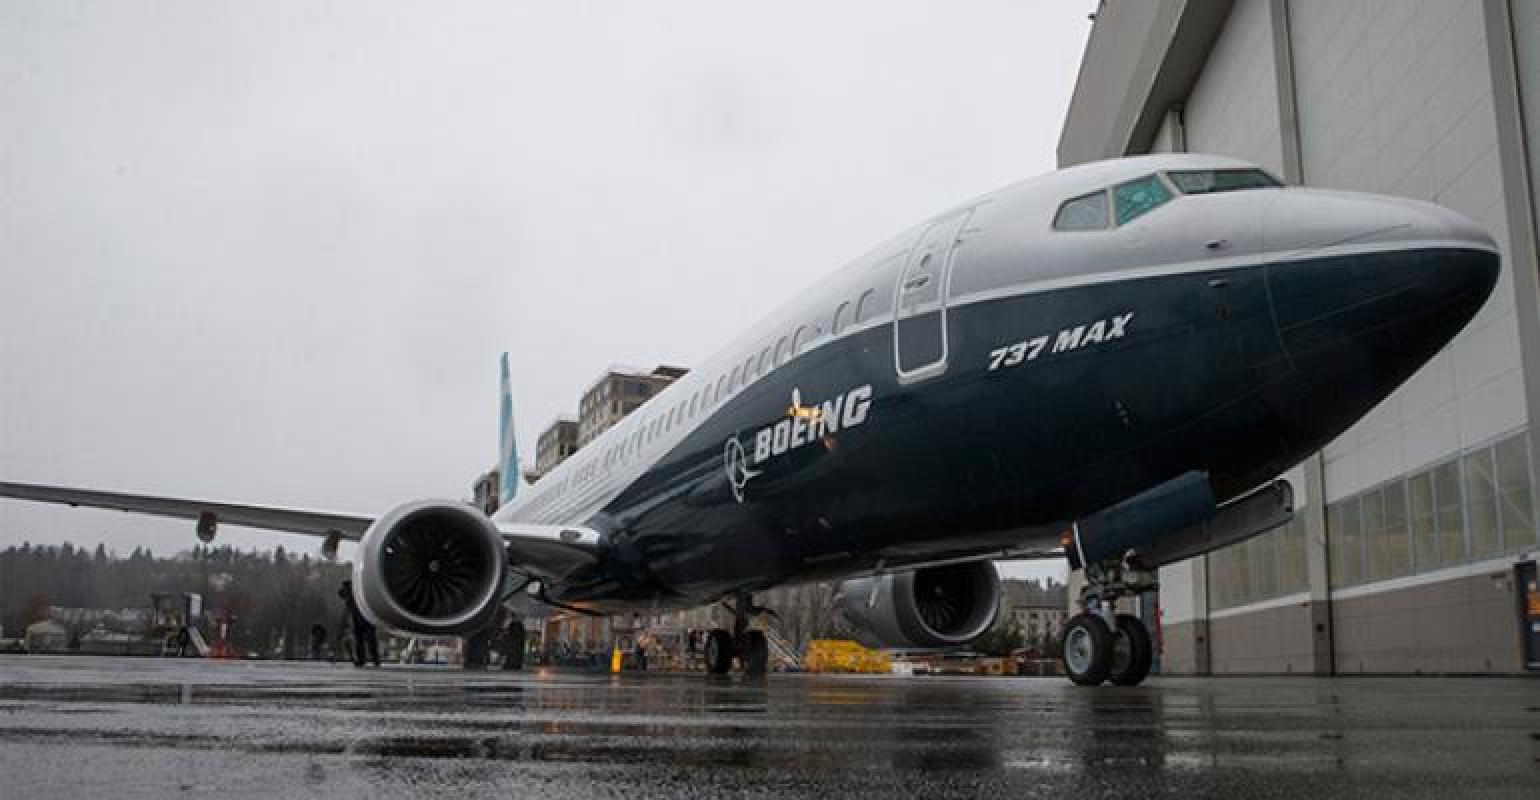 Turn around time of each Boeing 737 MAX prohibited for flight costs 2 thousands USD per month